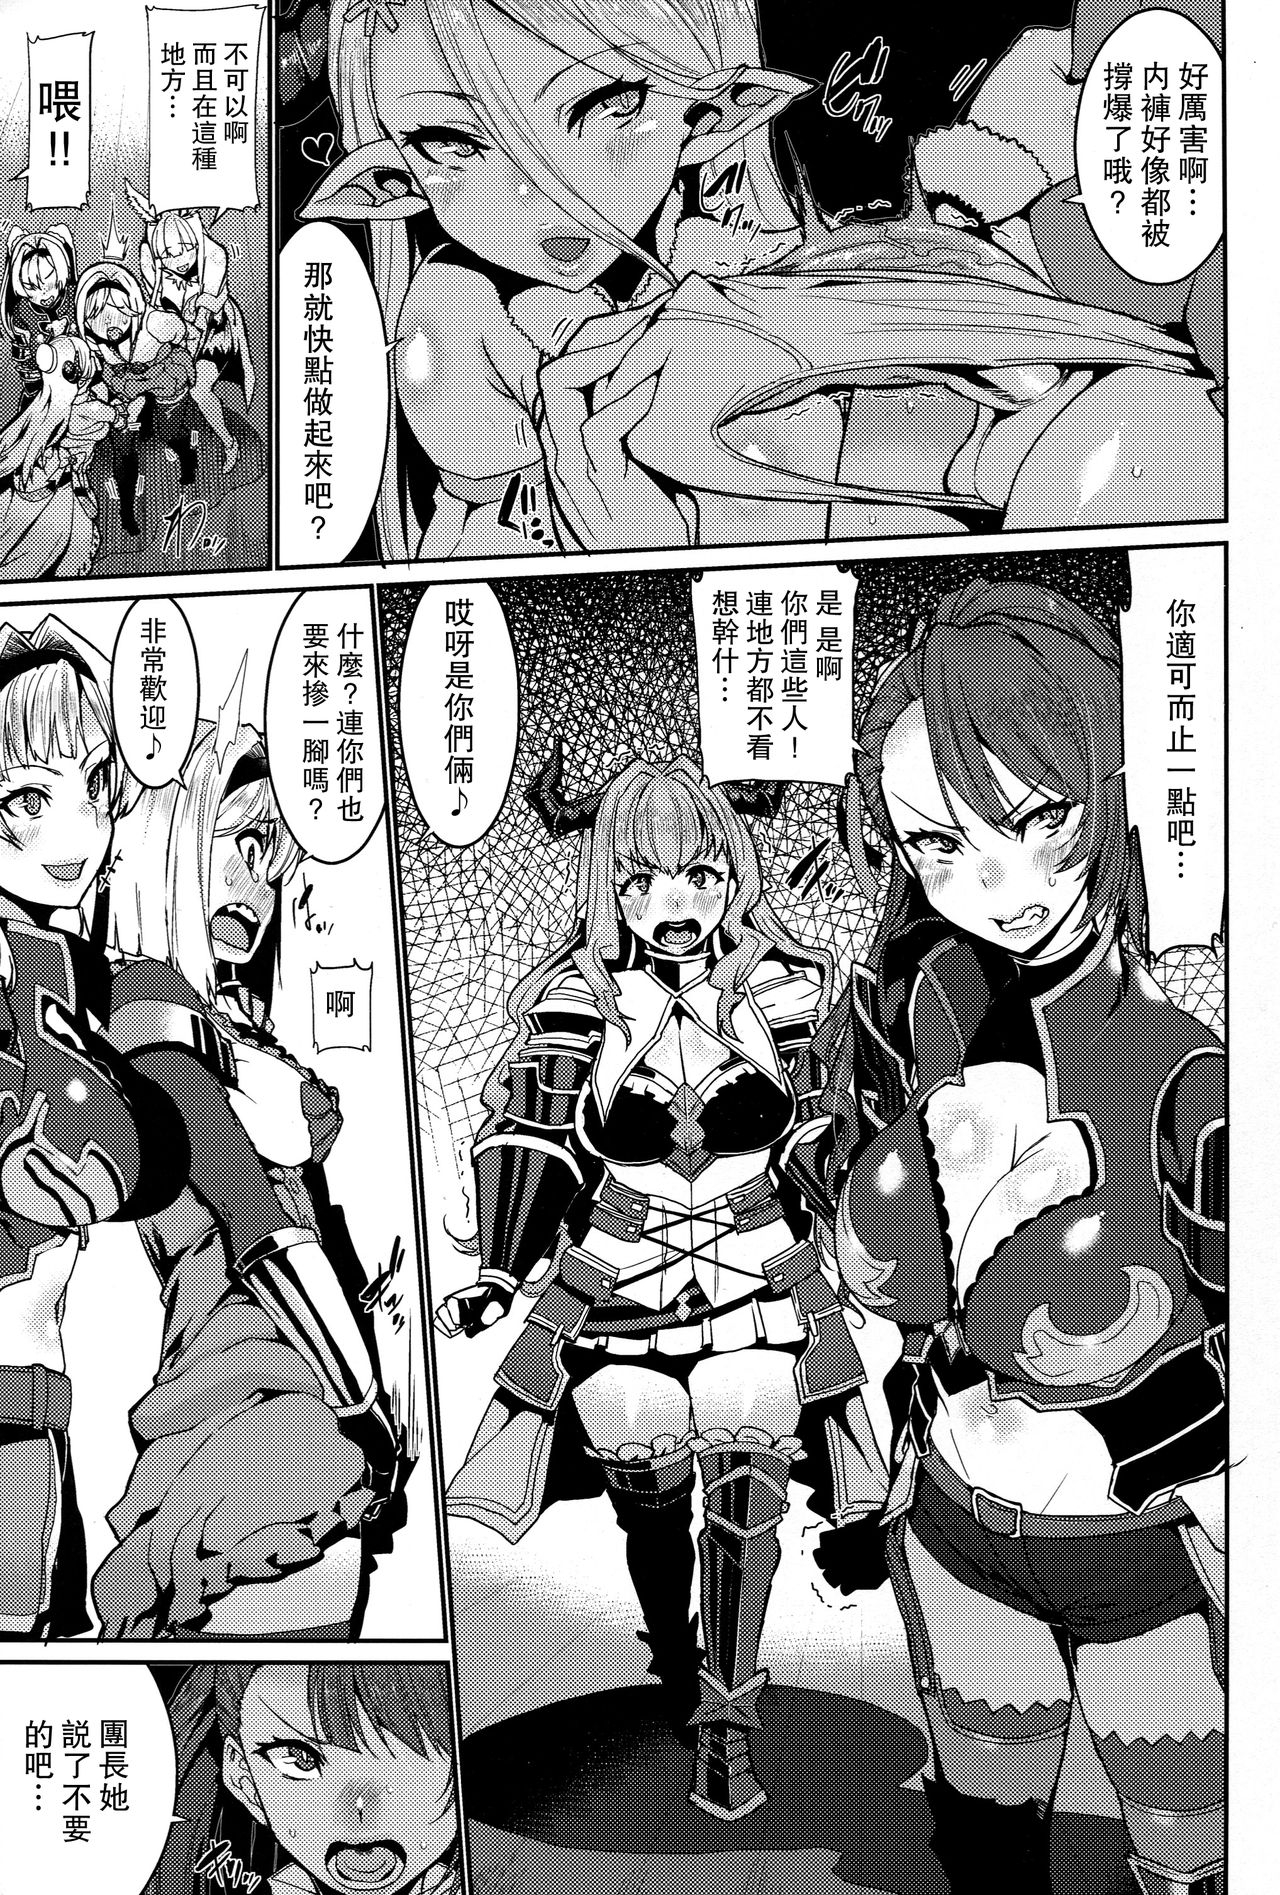 [HBO (Henkuma)] Be covered, be smeared (Granblue Fantasy) [Chinese] [路过的骑士汉化组] 4